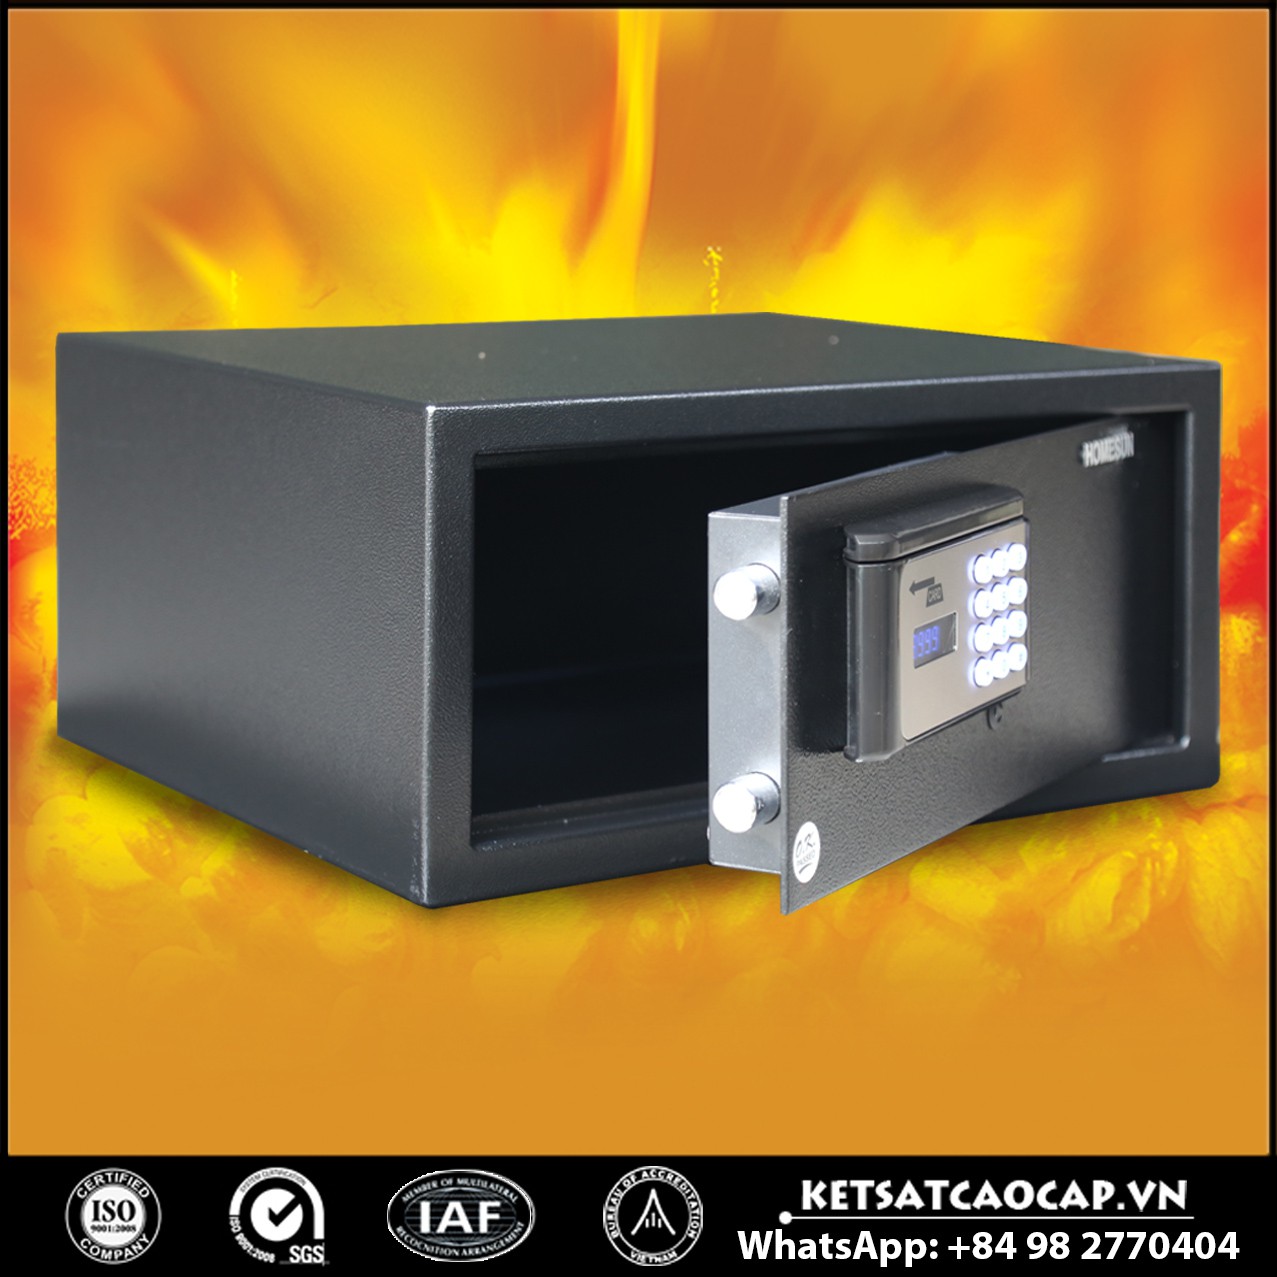 Hotel Safety Deposit Box Suppliers and Exporters‎